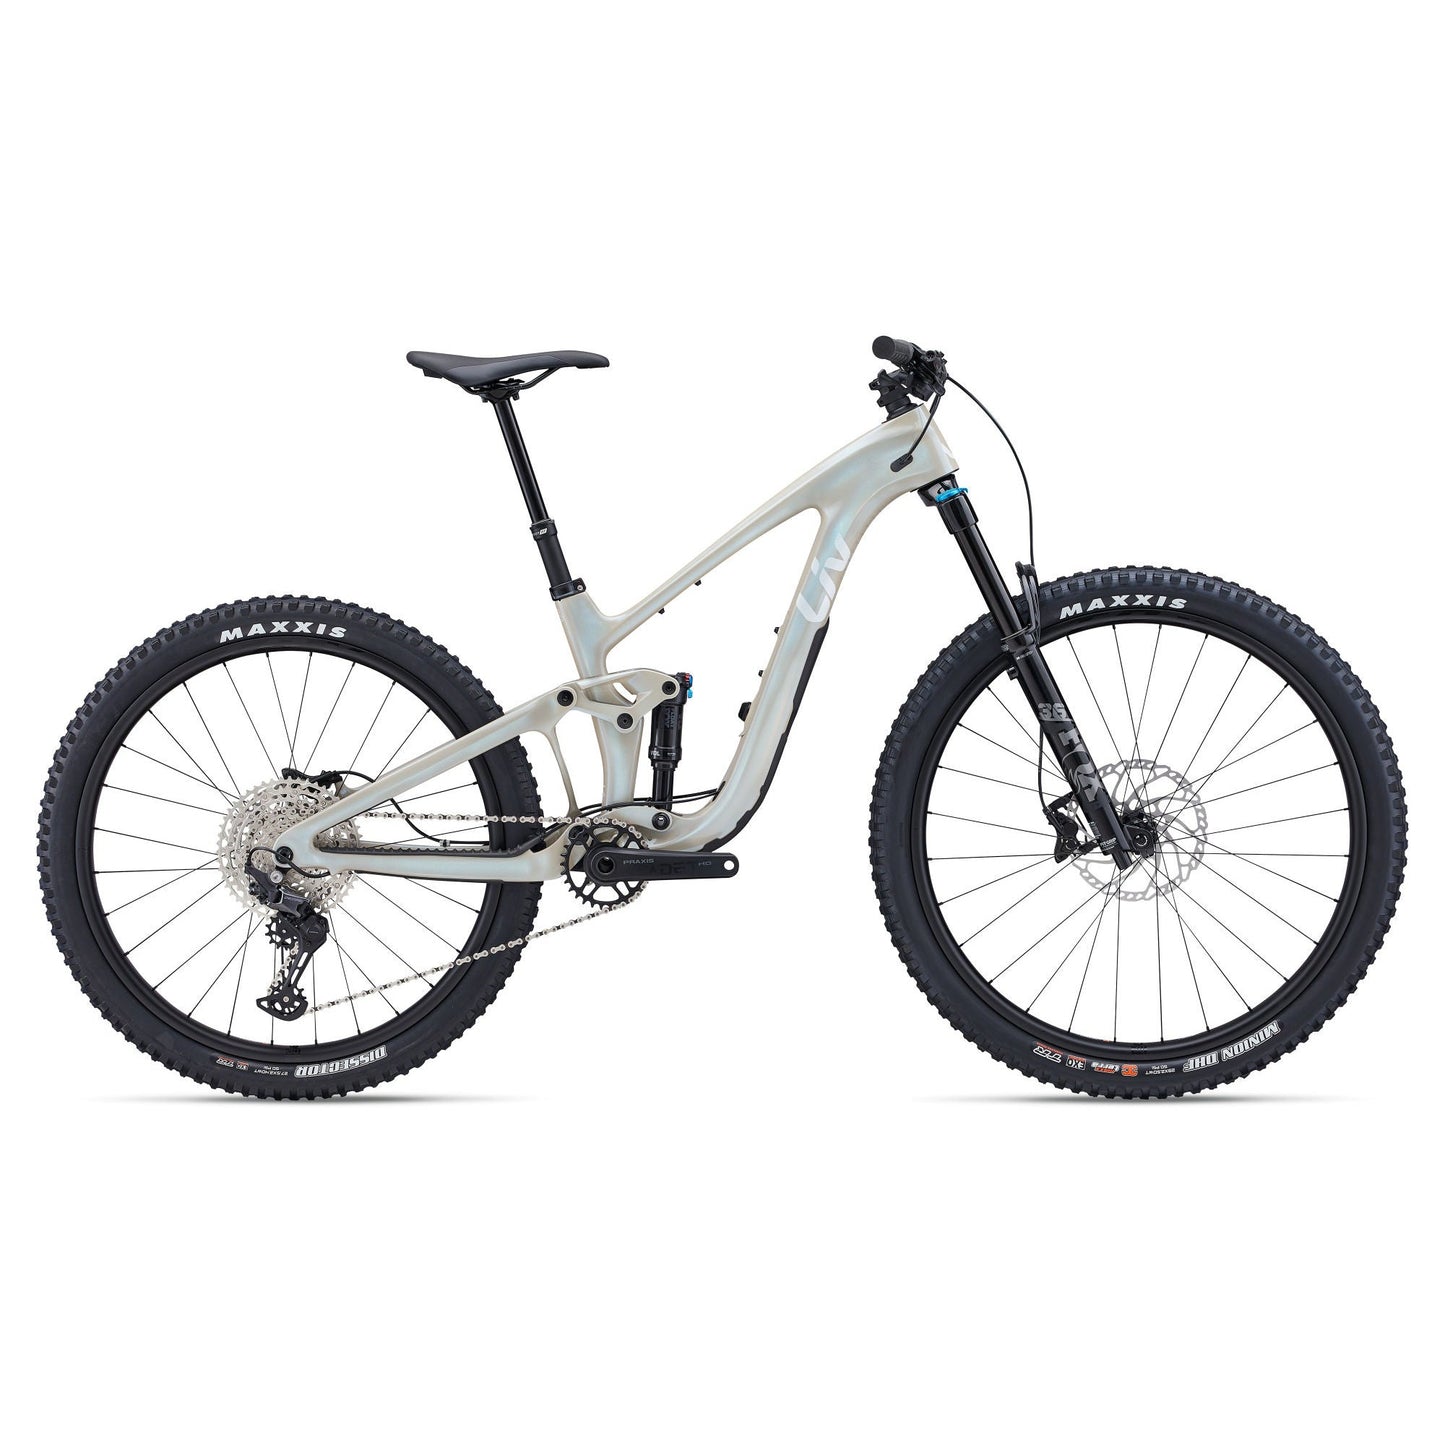 Liv Intrigue X Advanced 3 - Bikes - Full Suspension 29 - Bicycle Warehouse